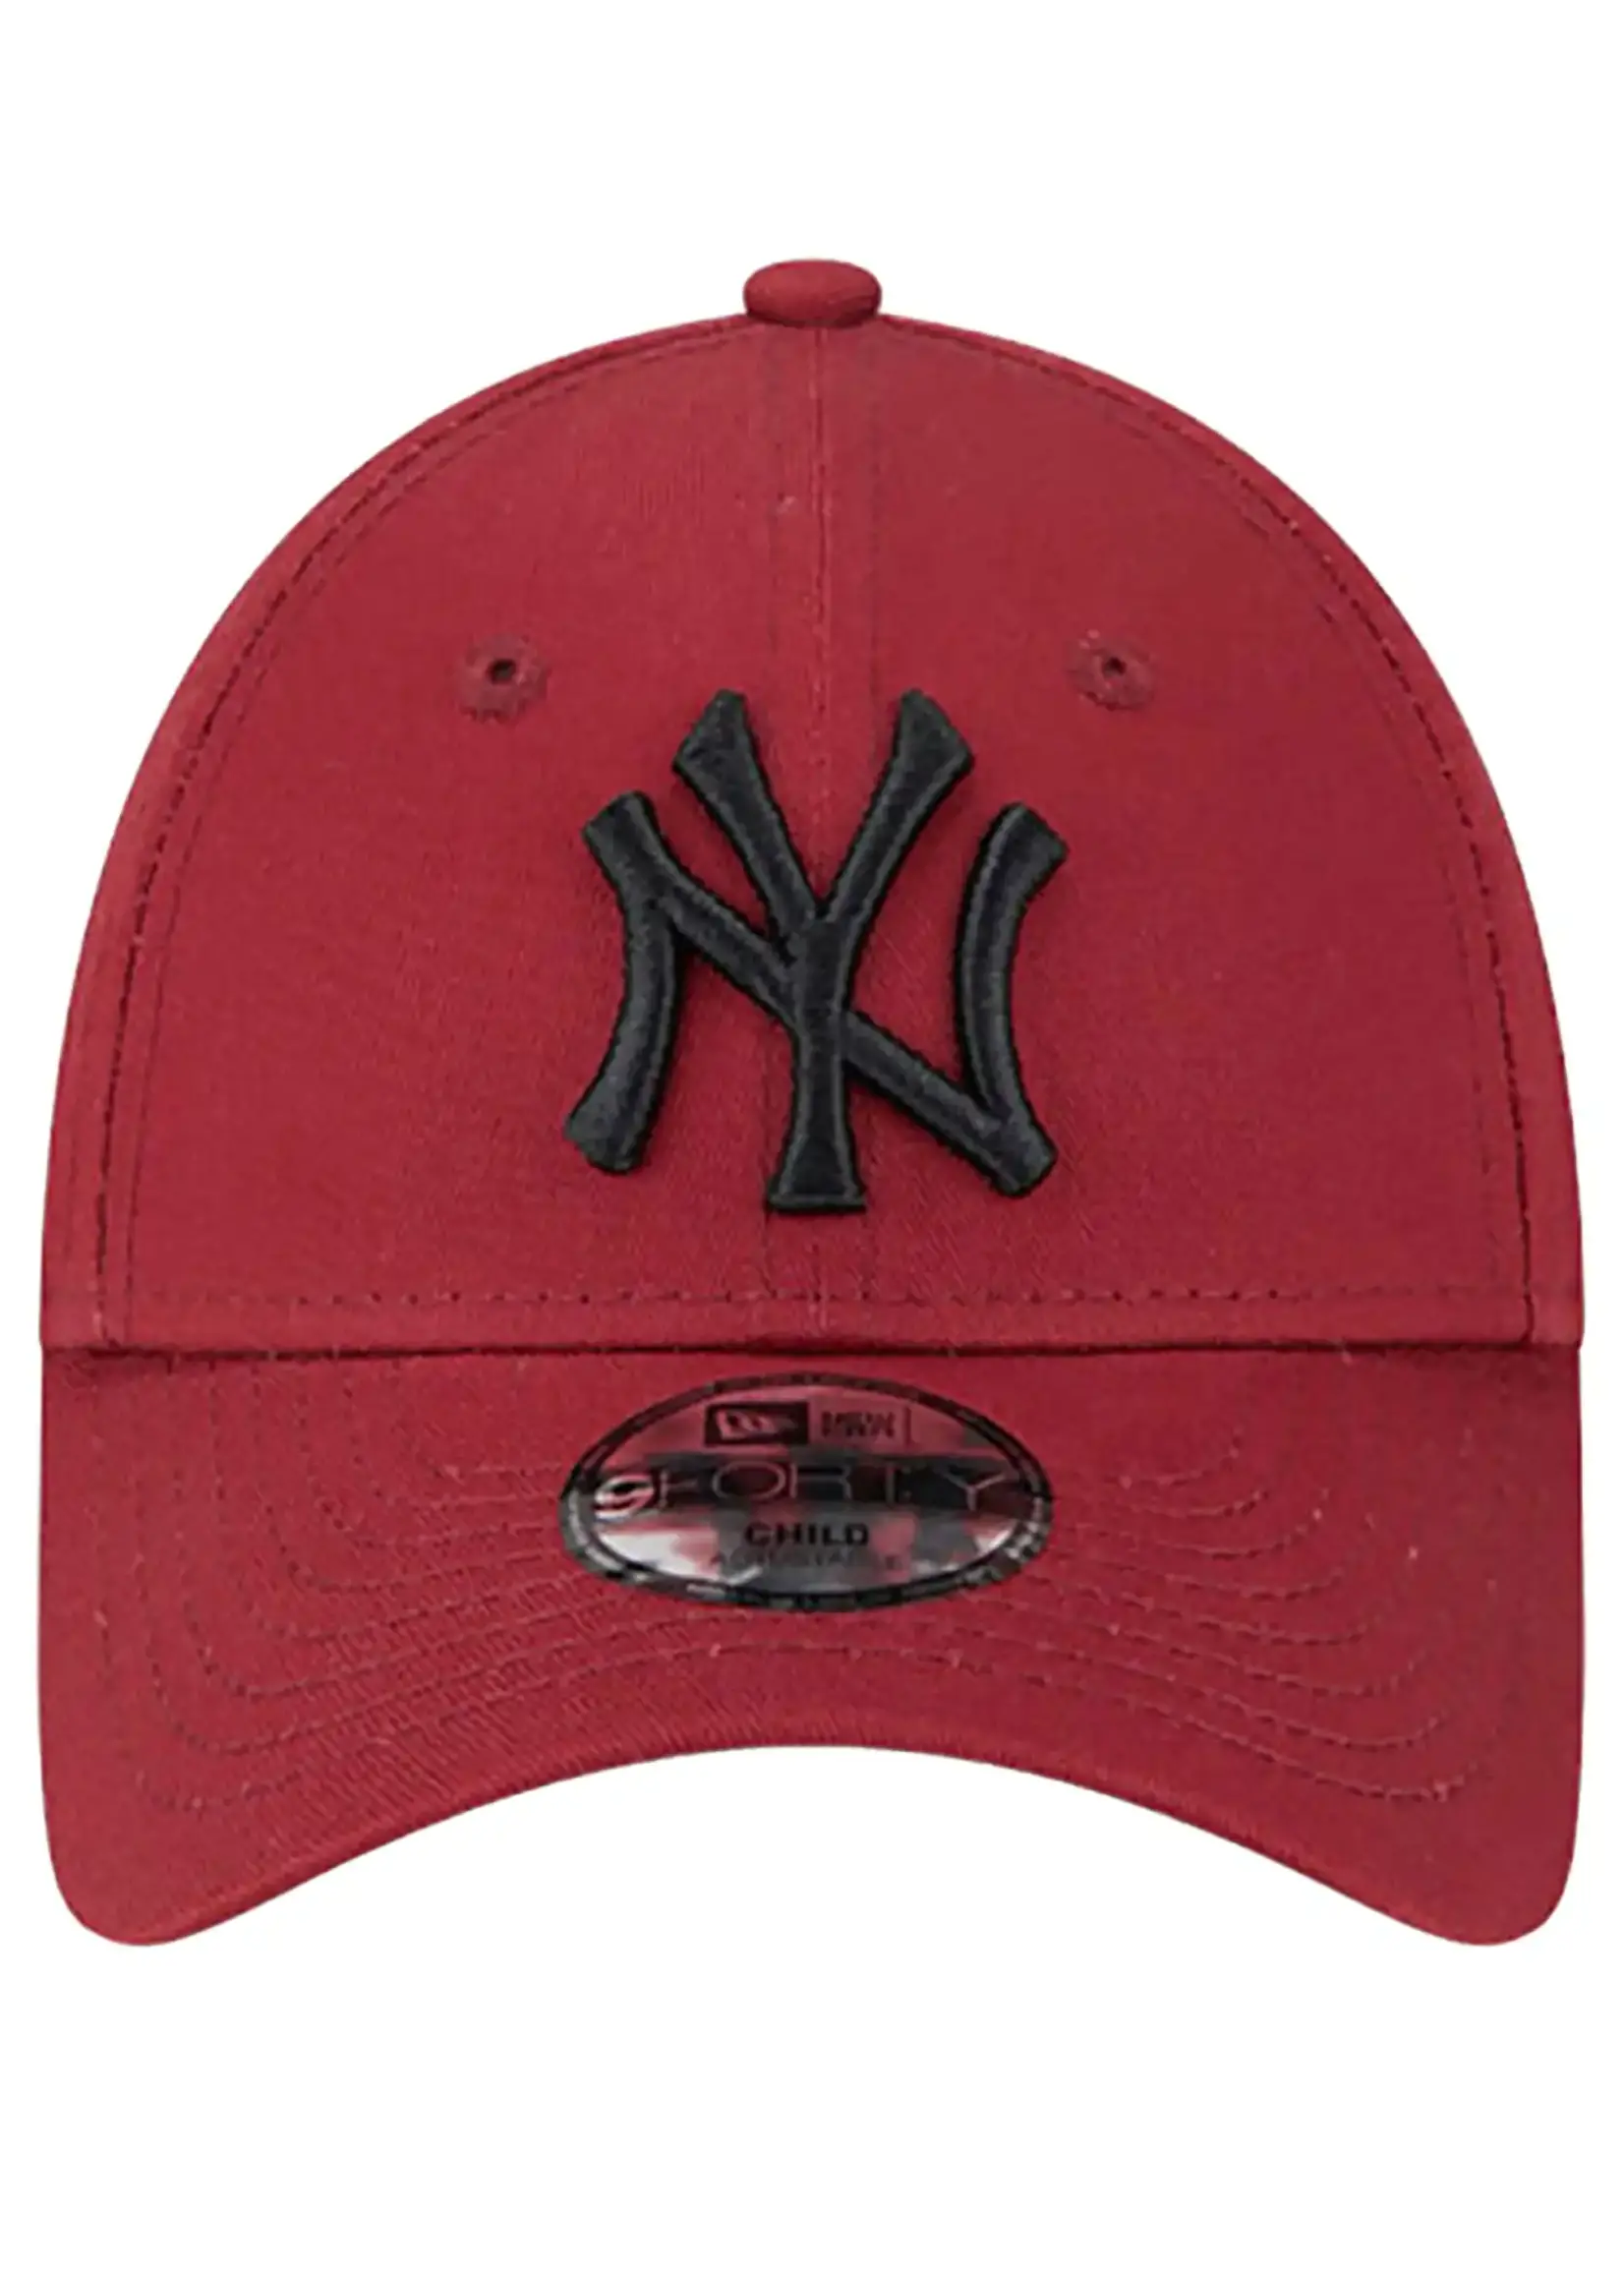 New Era New York Yankees  9Forty Youth Cap Wine Red Black